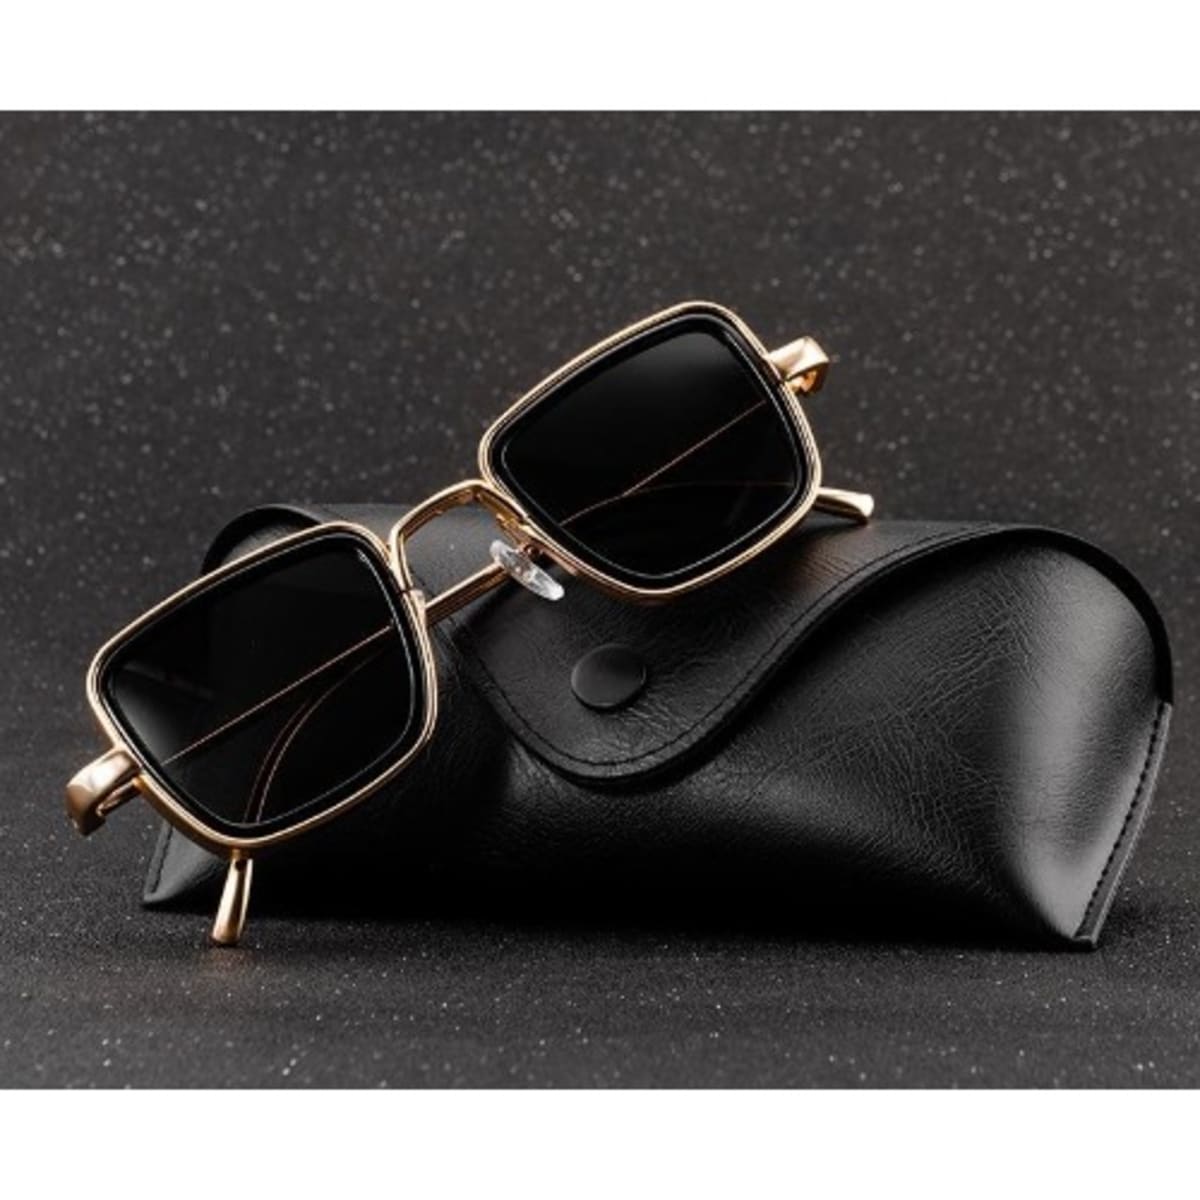 RayBan Sunglasses For Men To Aesthetic Protection Of Eyes-nextbuild.com.vn